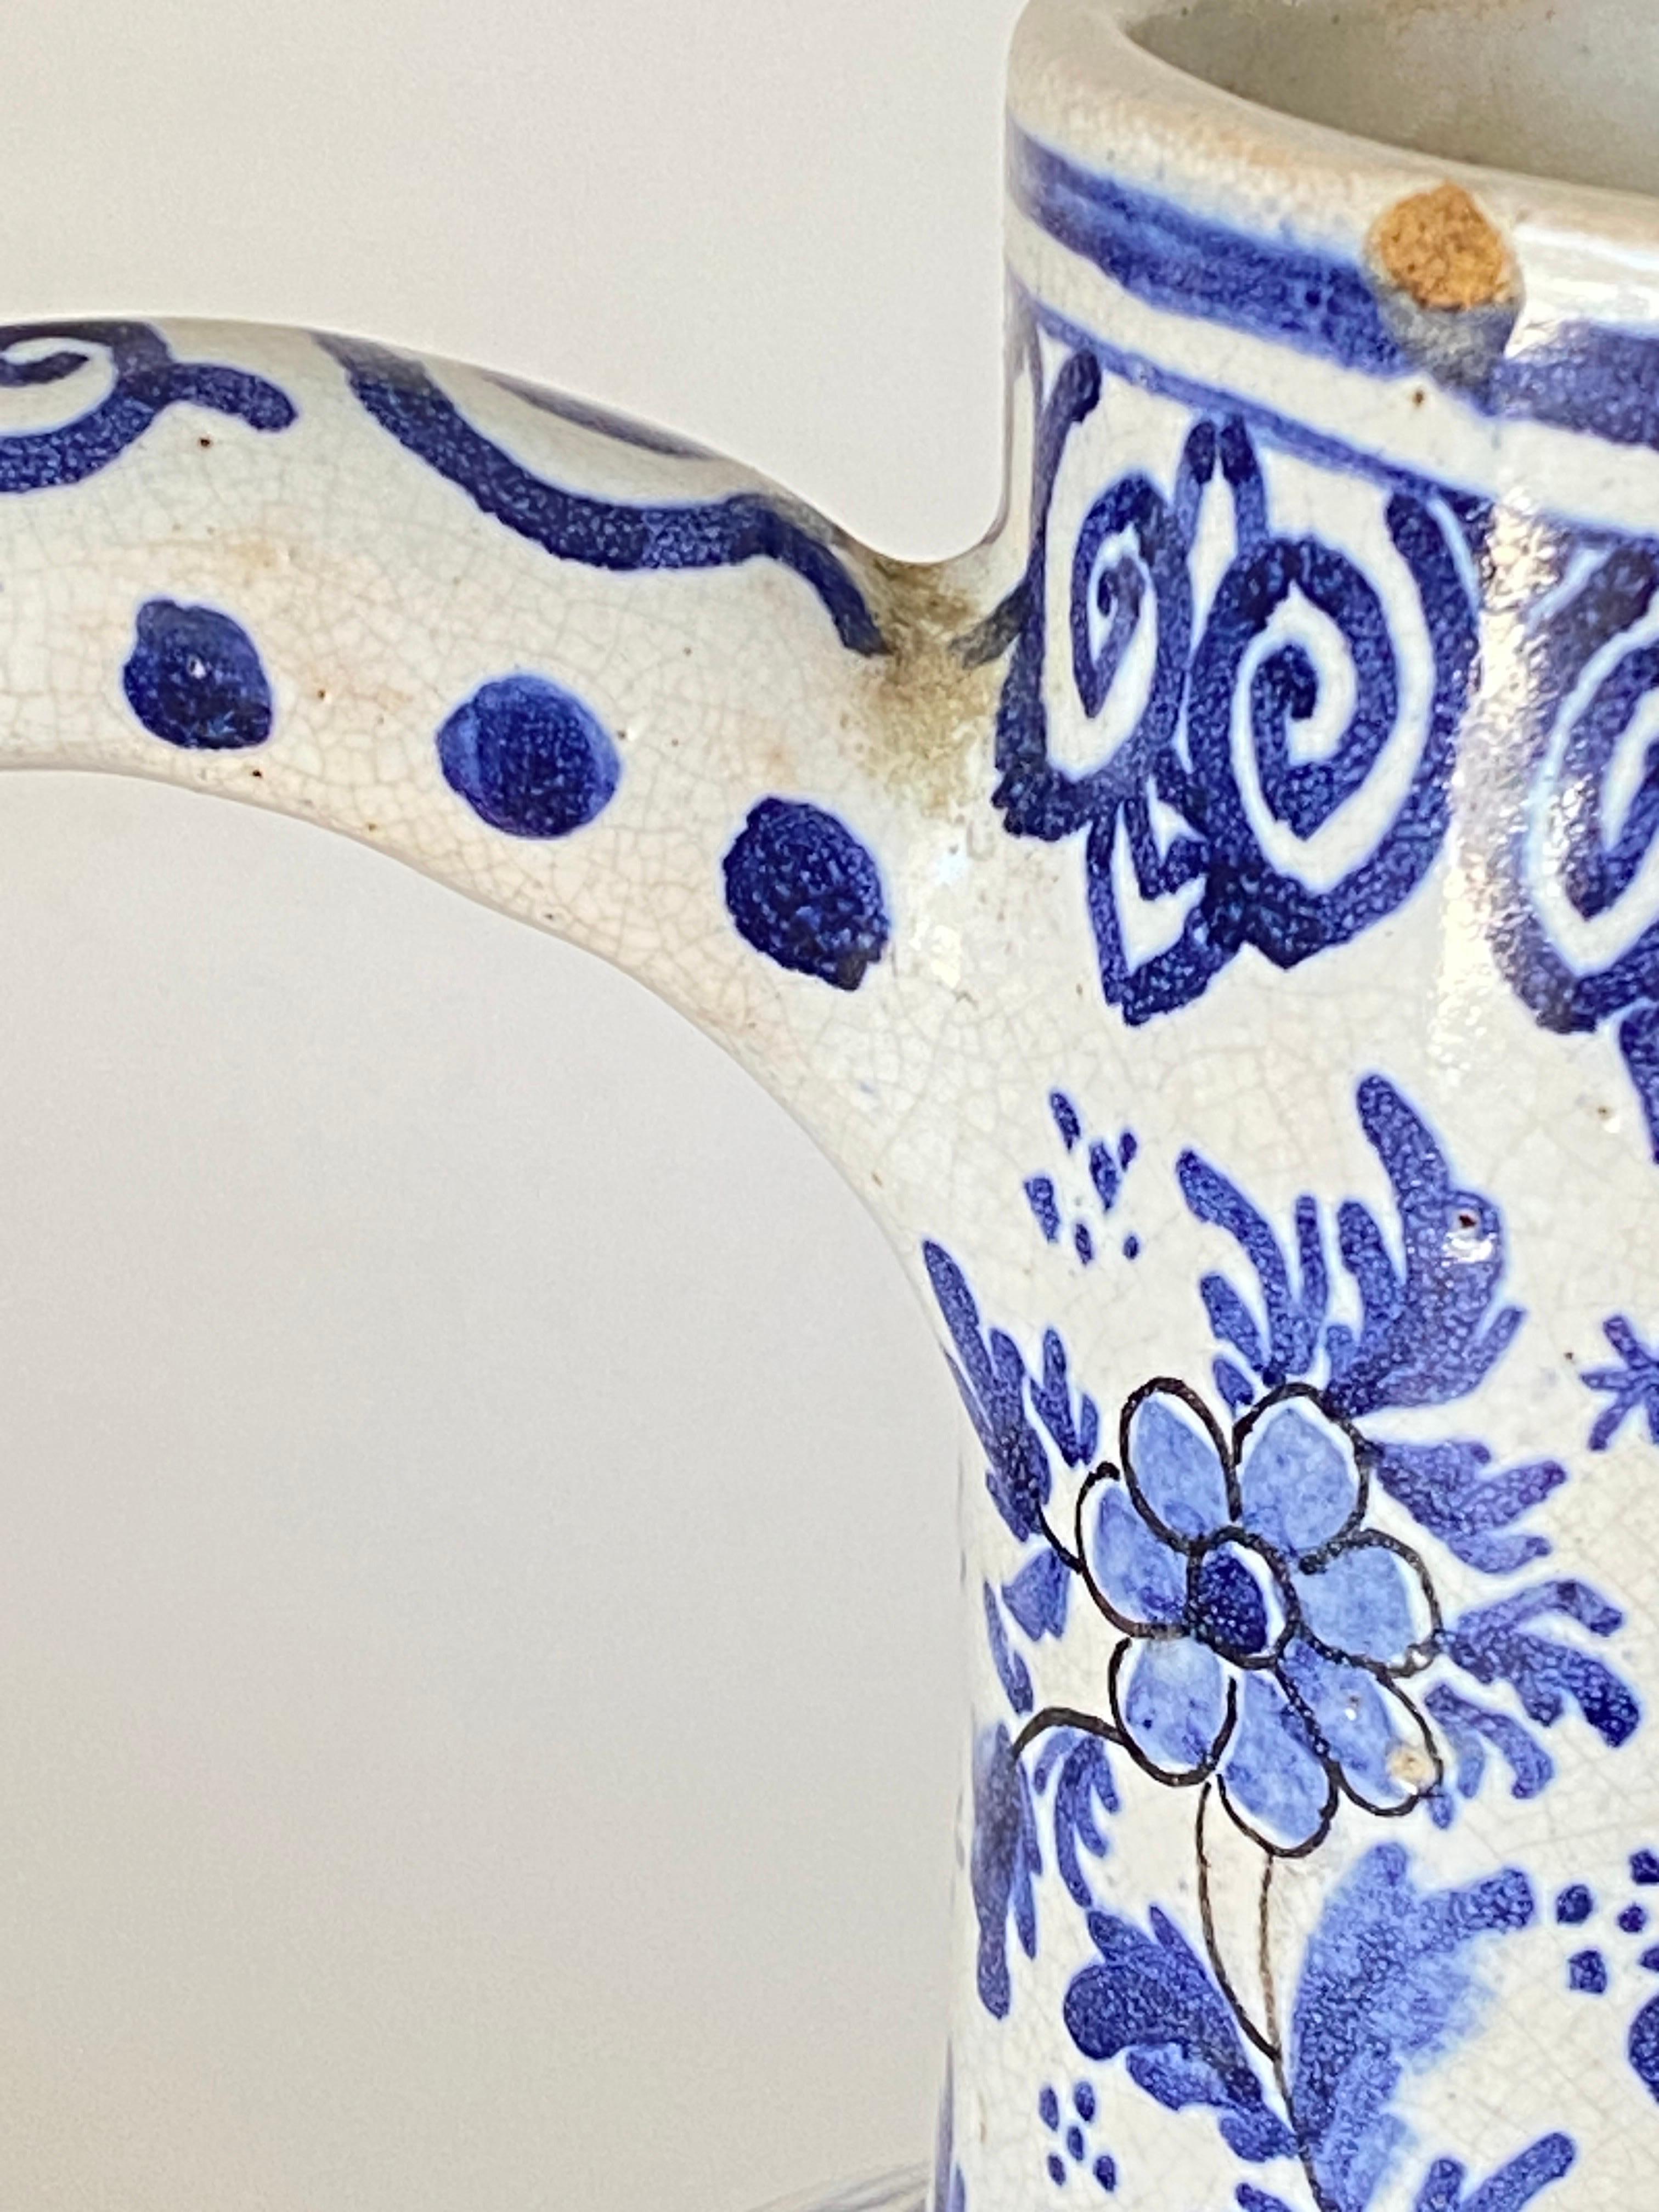 Faience Delft Jug in Faïence, White and Blue, 18eme Century by Adrian Pynacker Signed For Sale